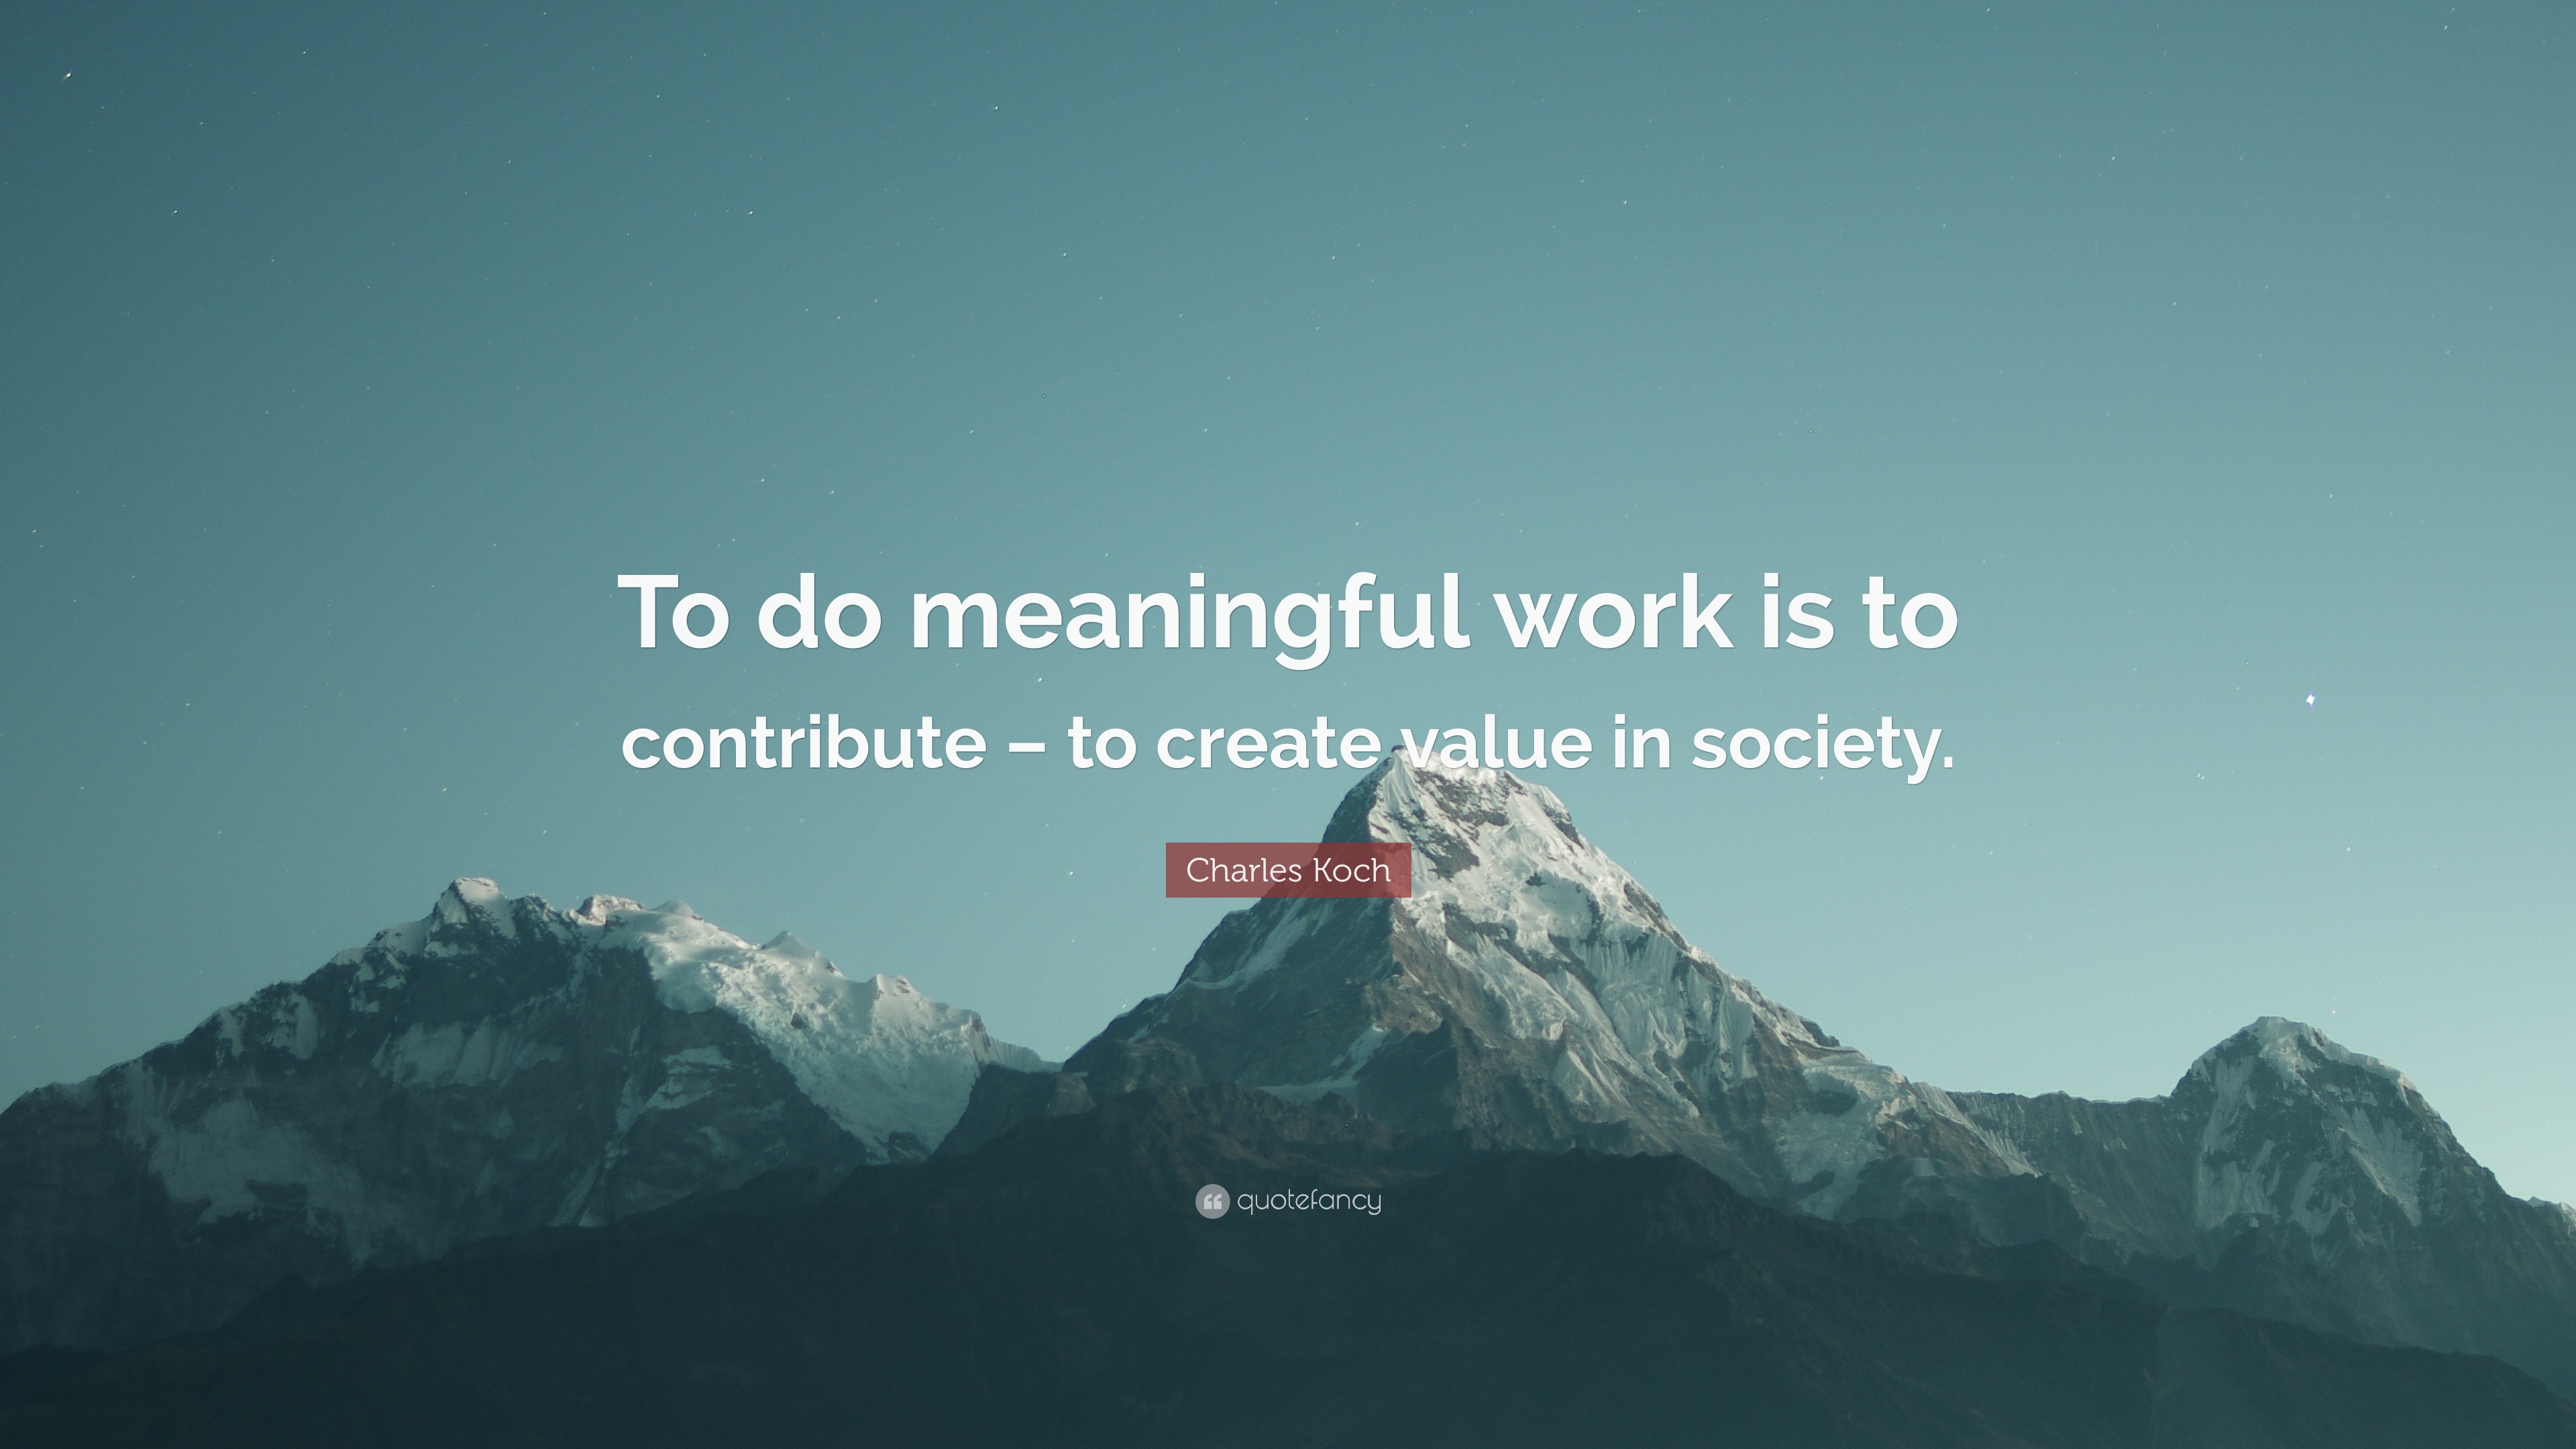 Charles Koch Quote: “To do meaningful work is to contribute – to create